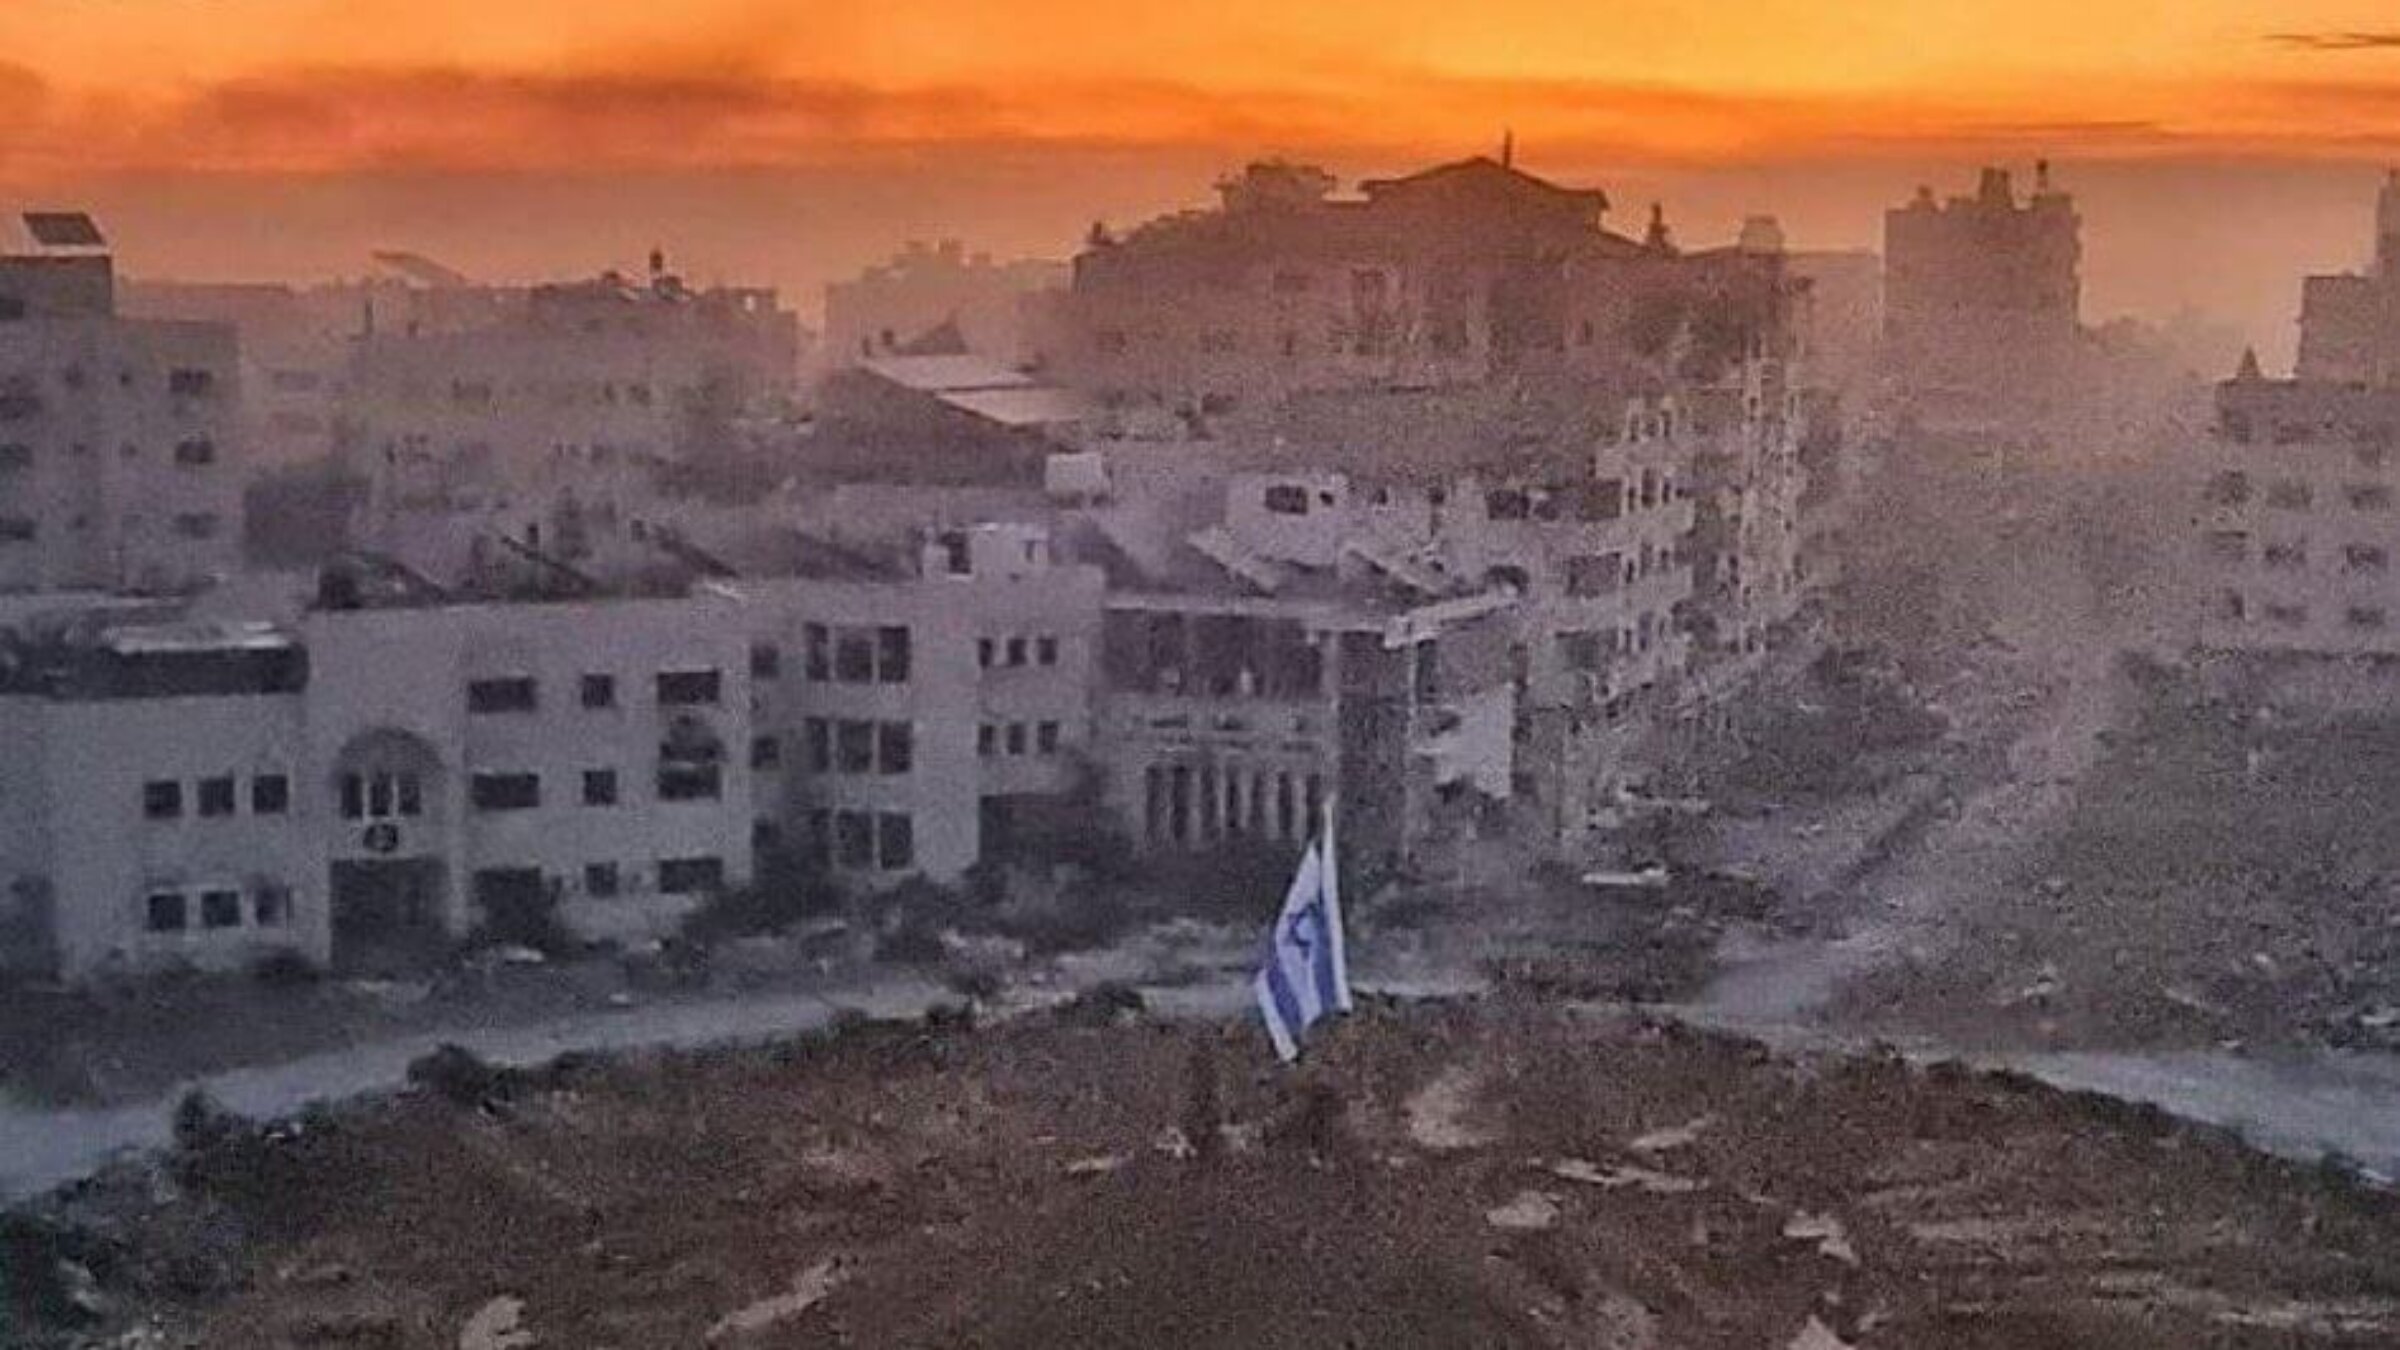 An Israeli flag is planted amid a central square in the ruins of Gaza City.